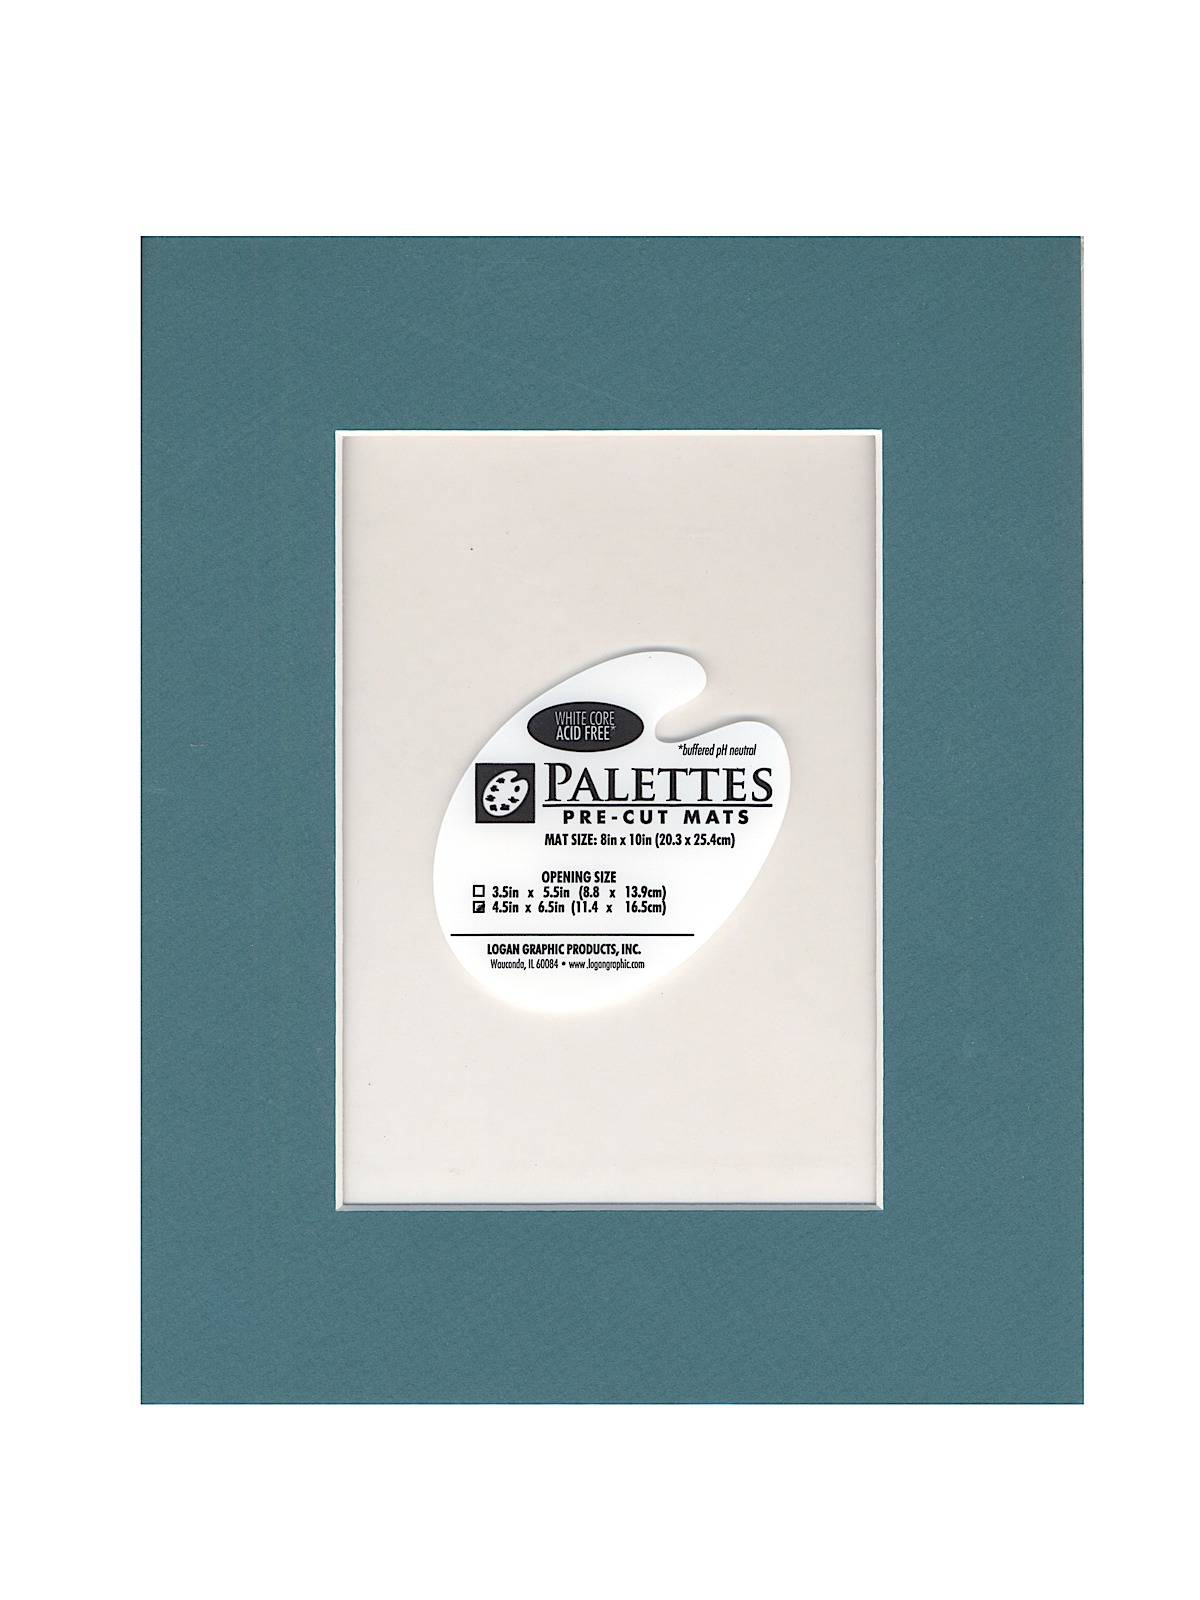 Palettes Pre-cut Mats Rectangle Teal 8 In. X 10 In.